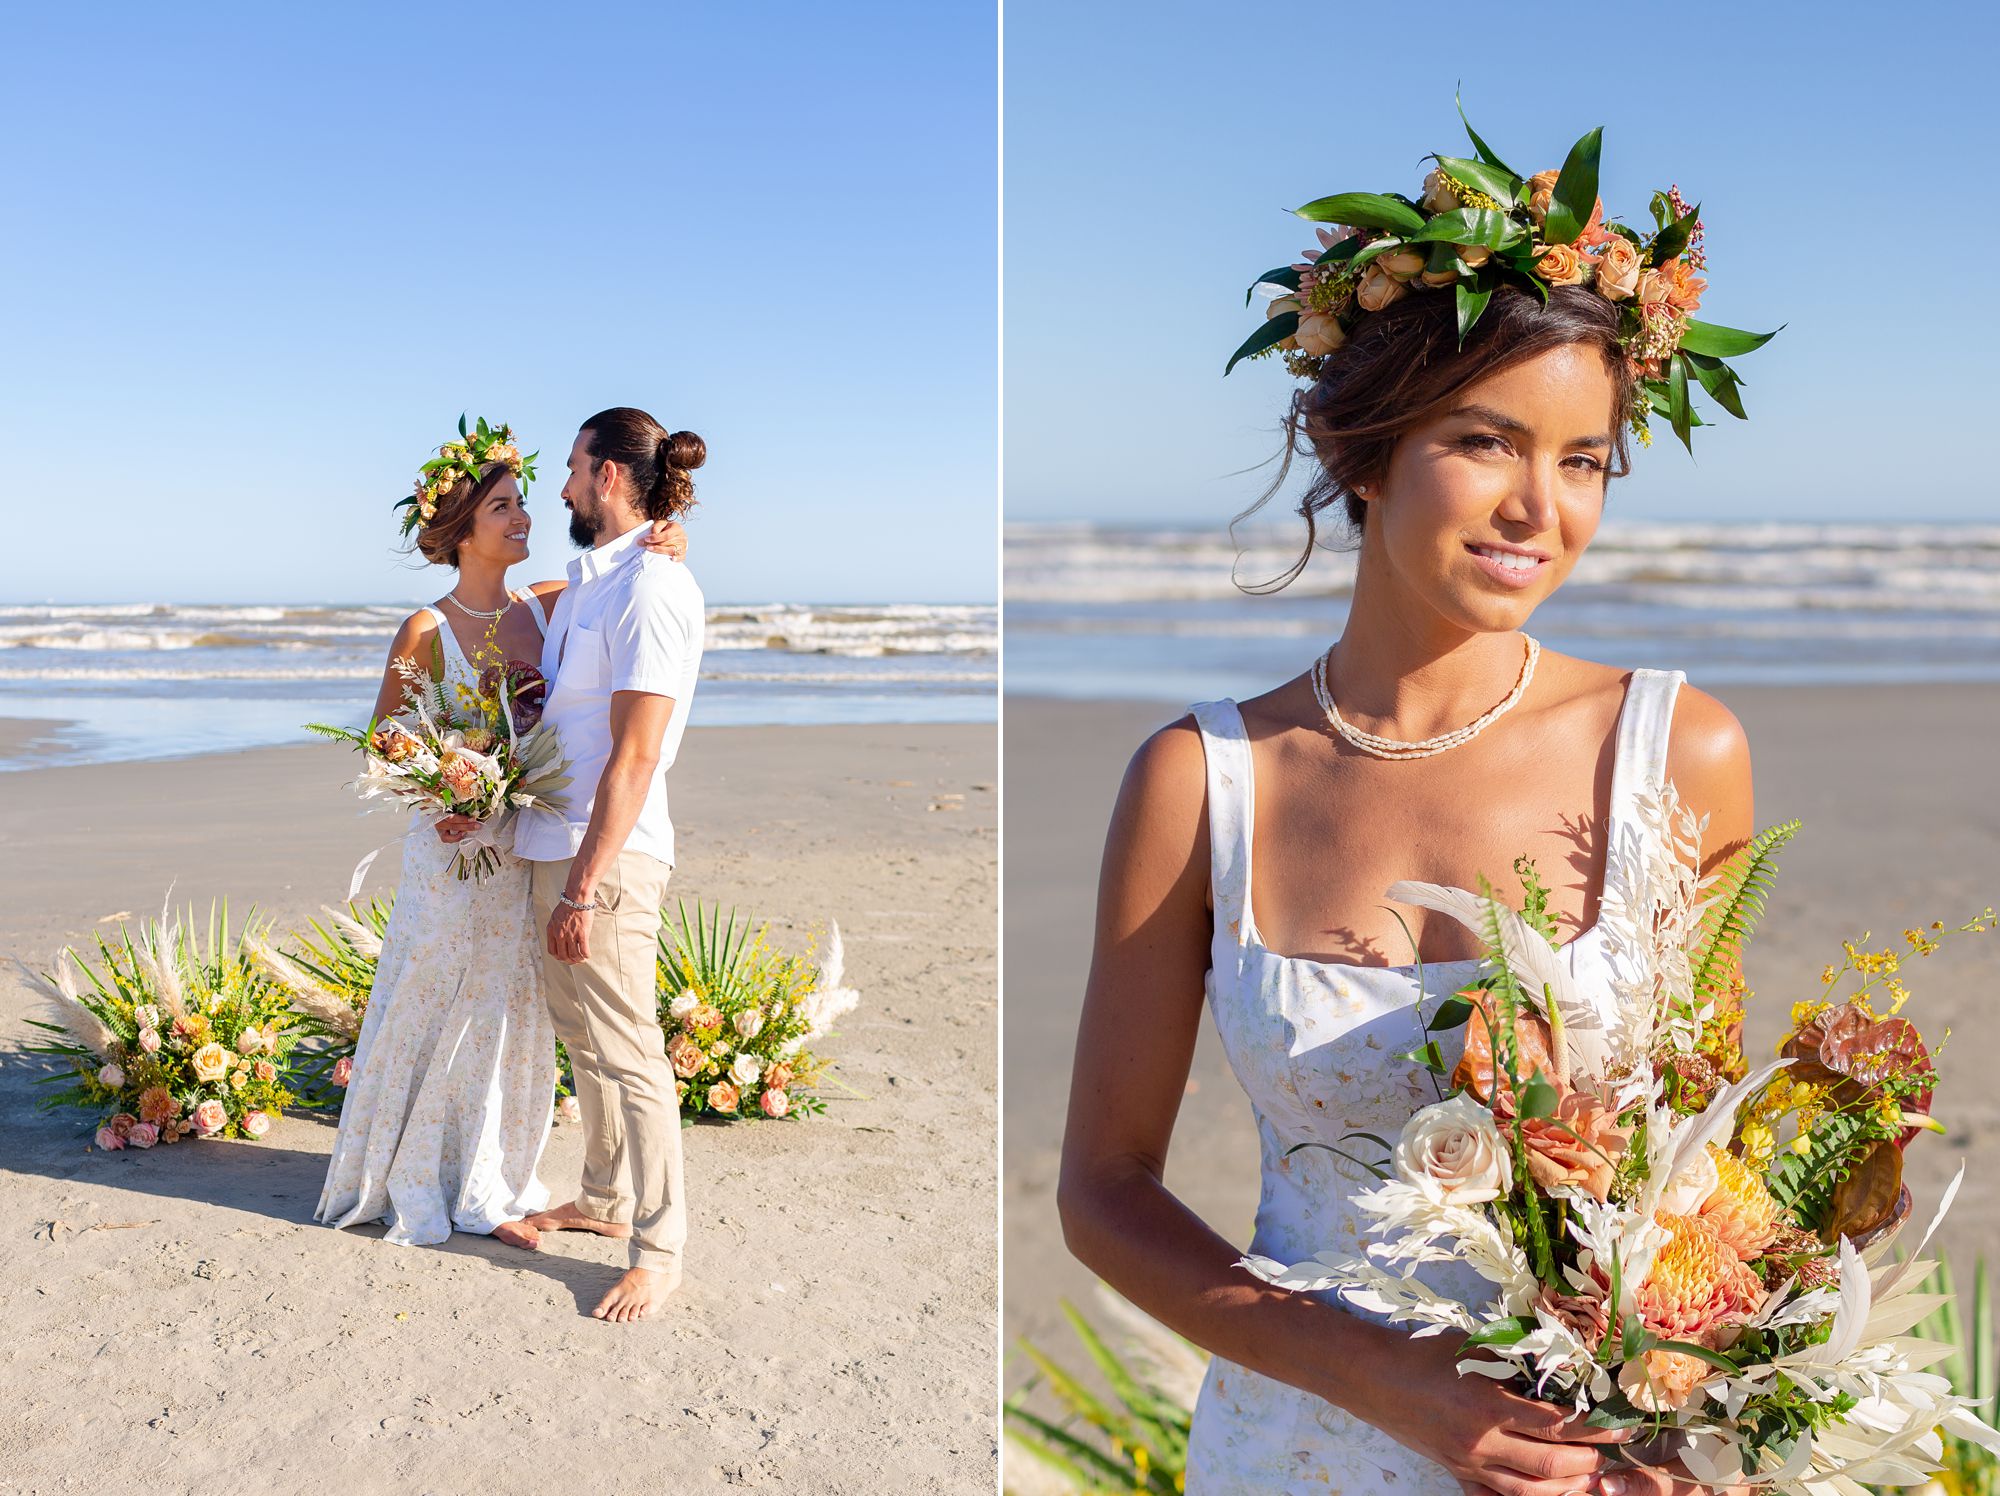 A bride wears a flower crown with orange roses and greenery while holding a pink orange and yellow bouquet.